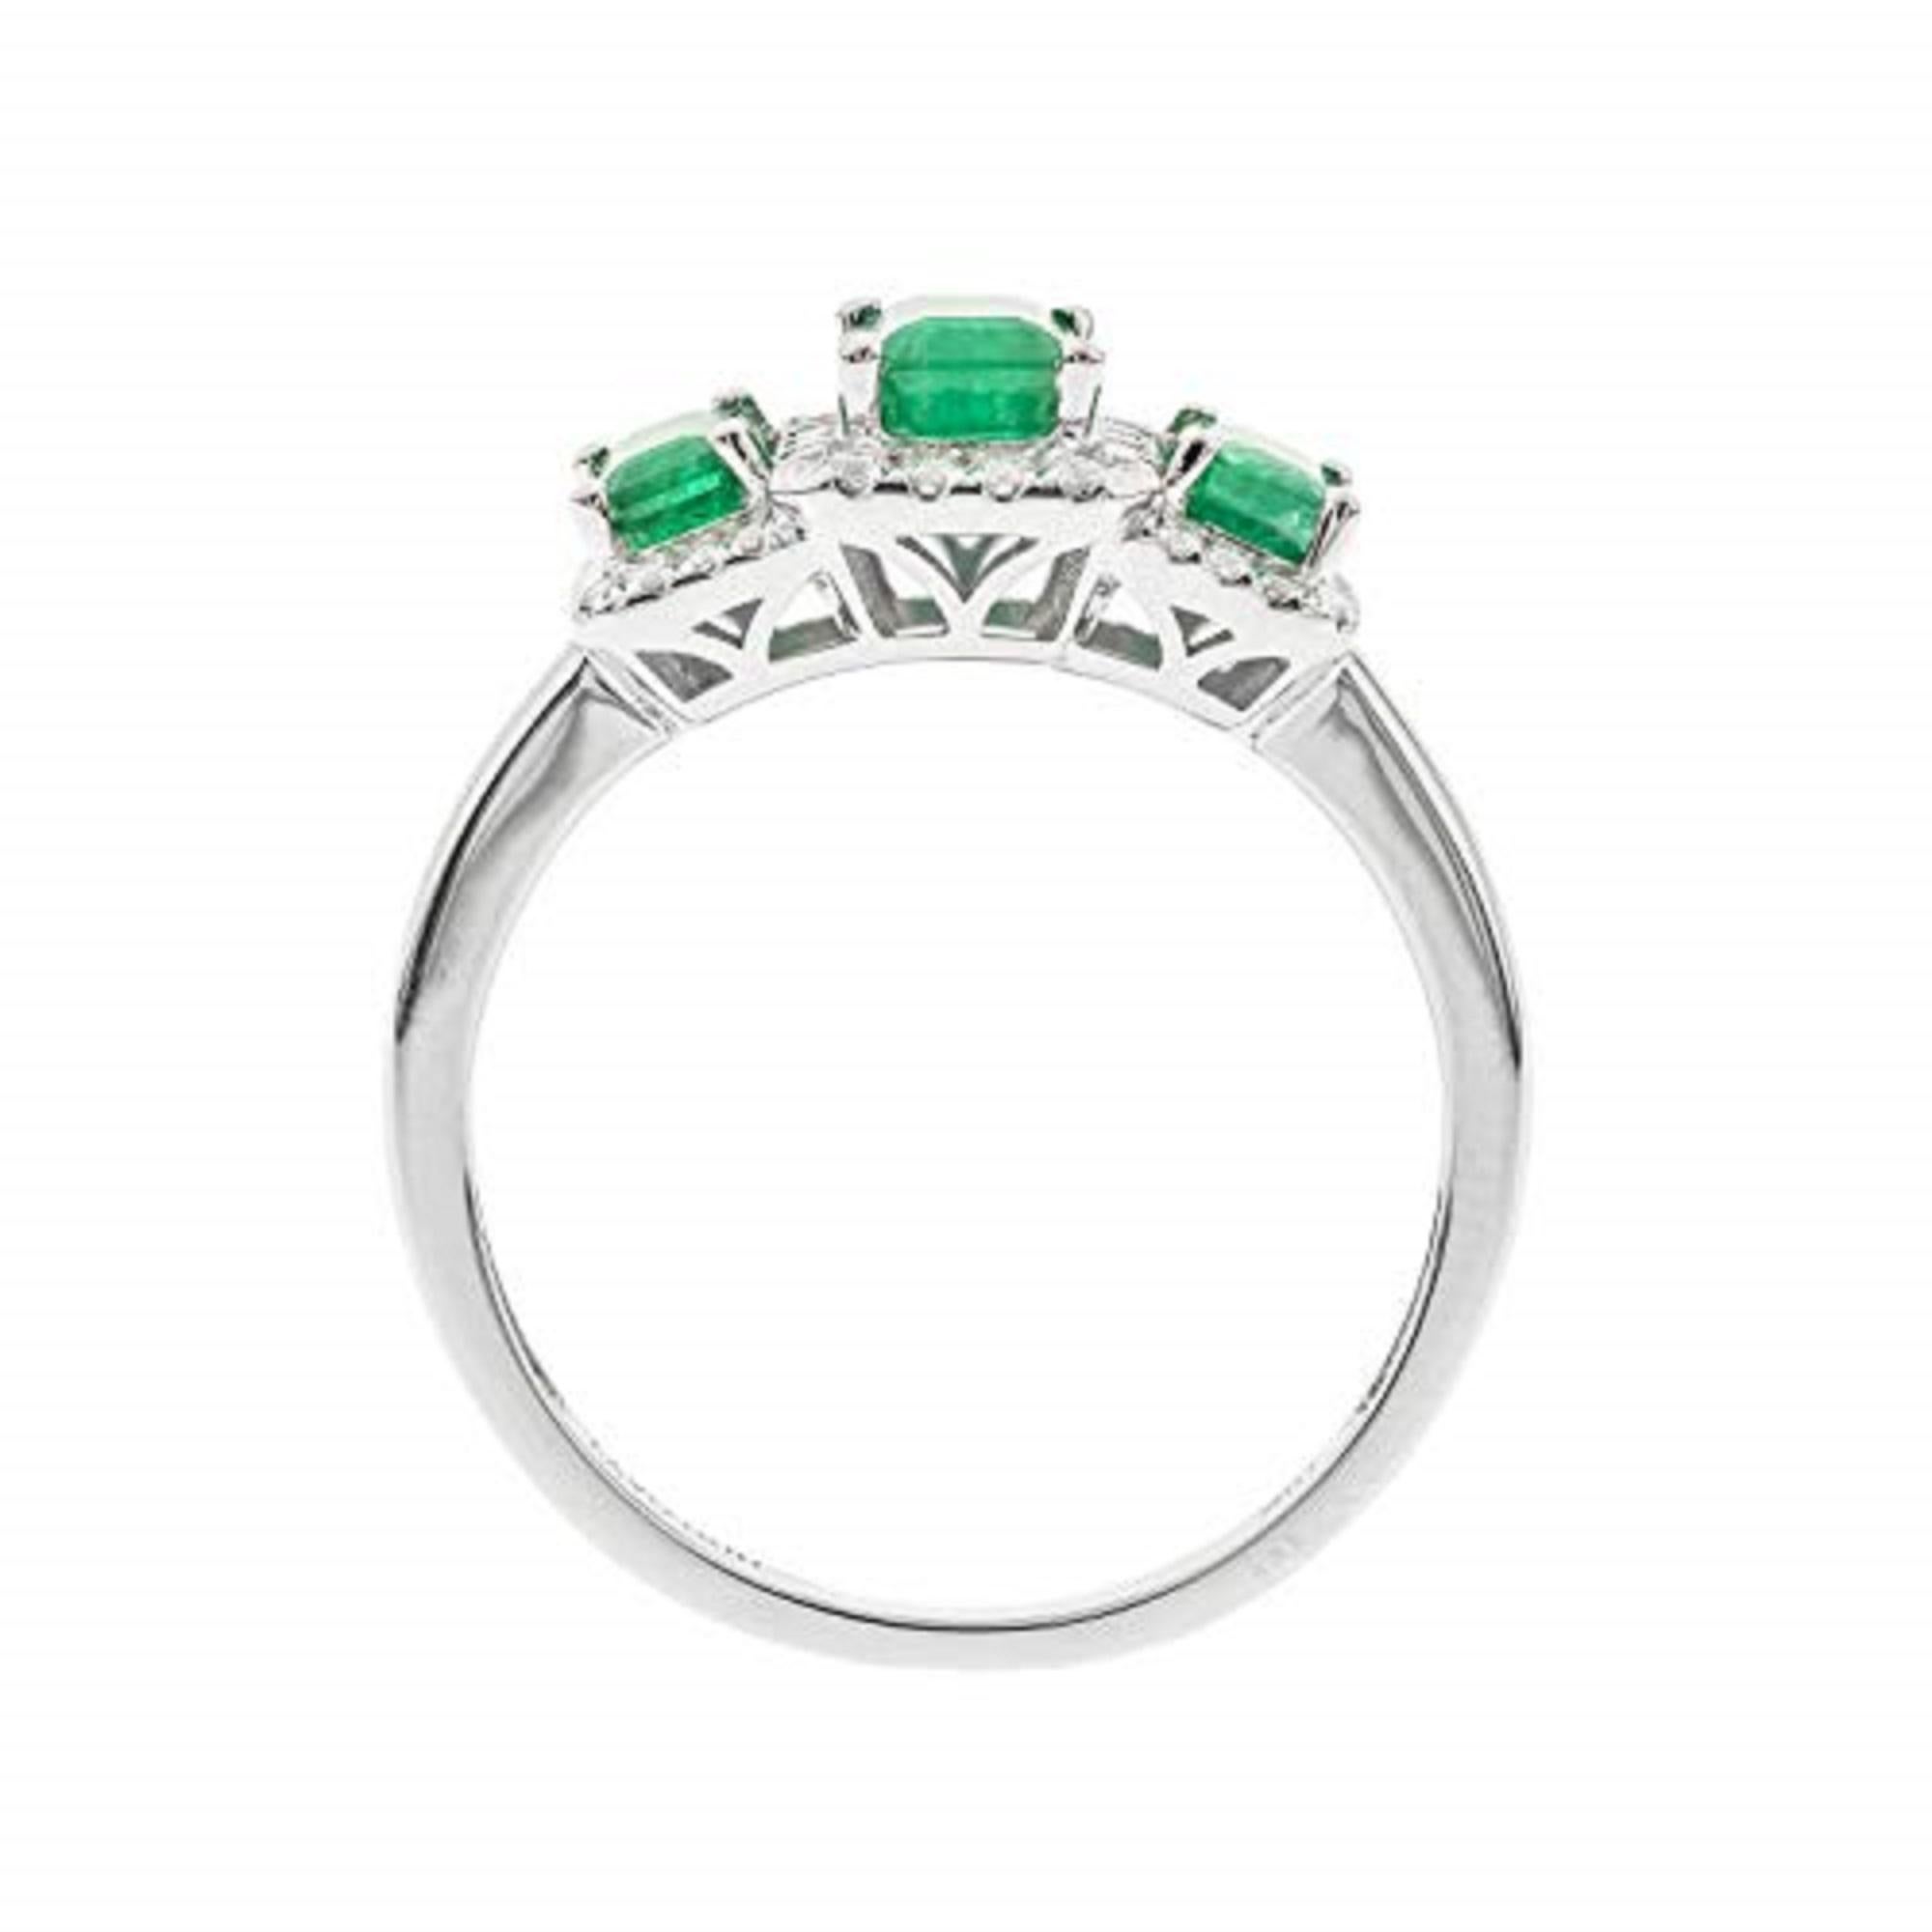 Emerald Cut Classic Emerald with Diamond Accents 10k White Gold Ring For Women/Girls For Sale